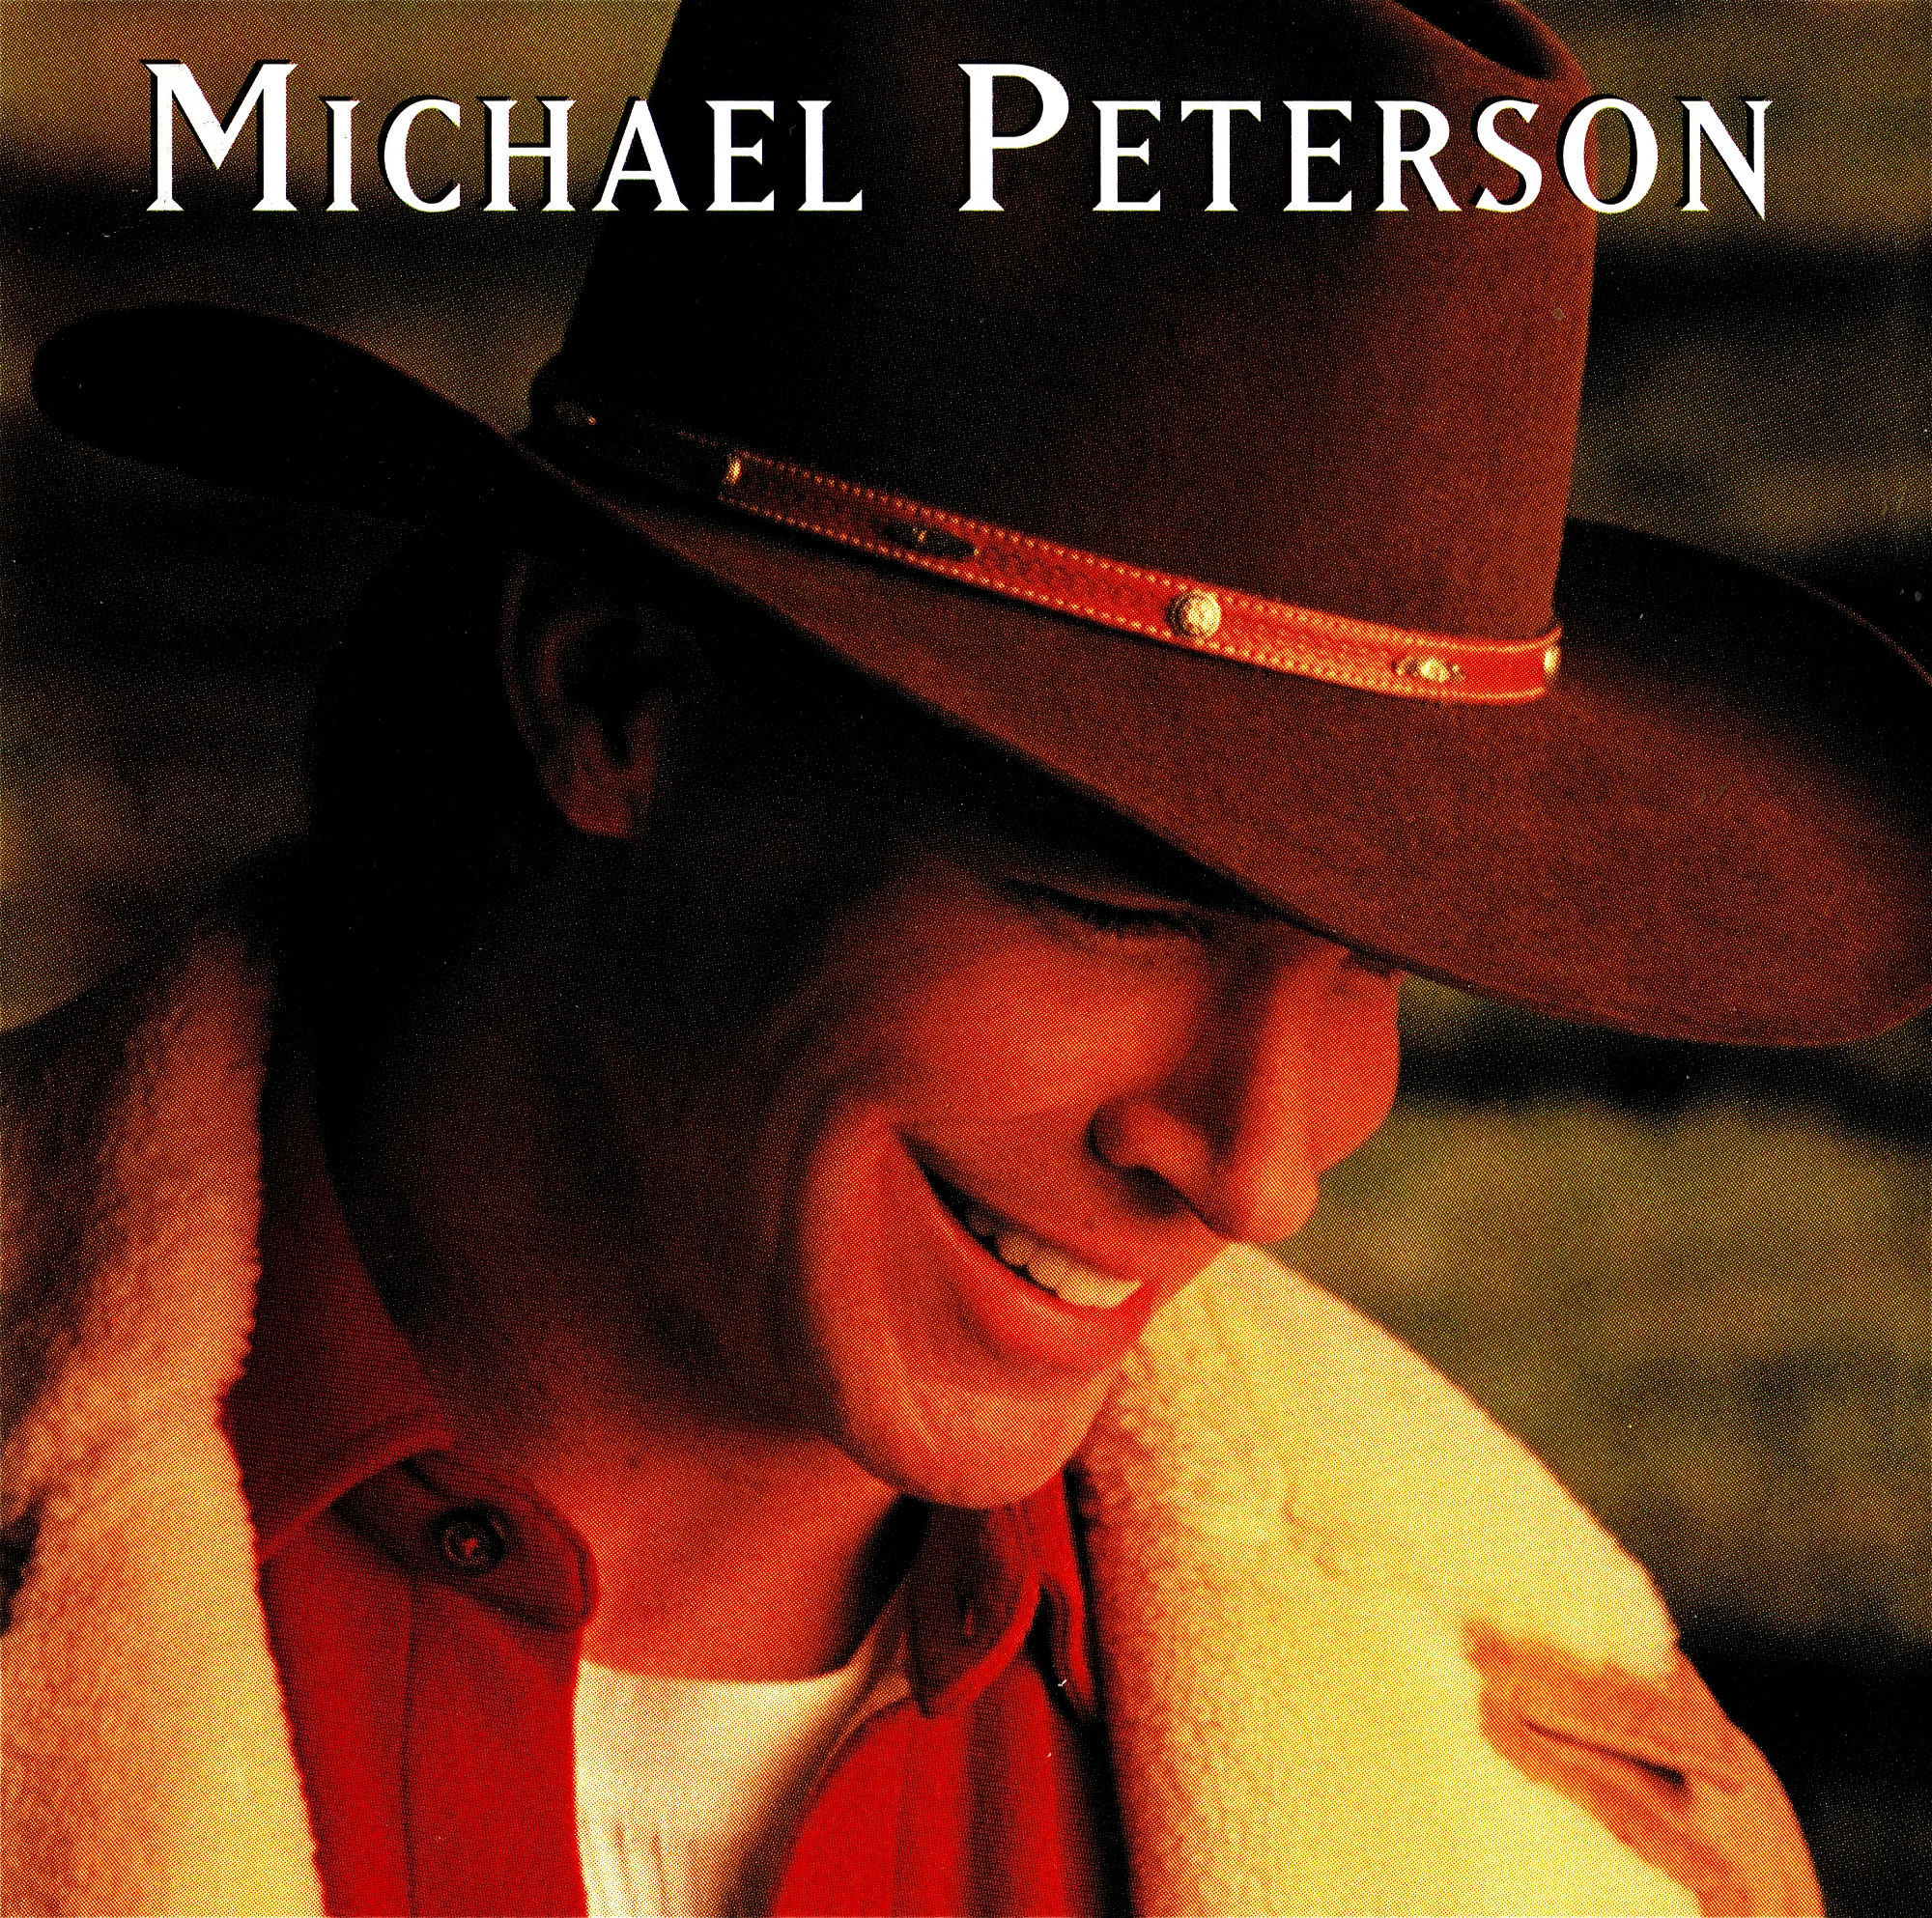 Michael Peterson's First Album on Warner Reprise 1997